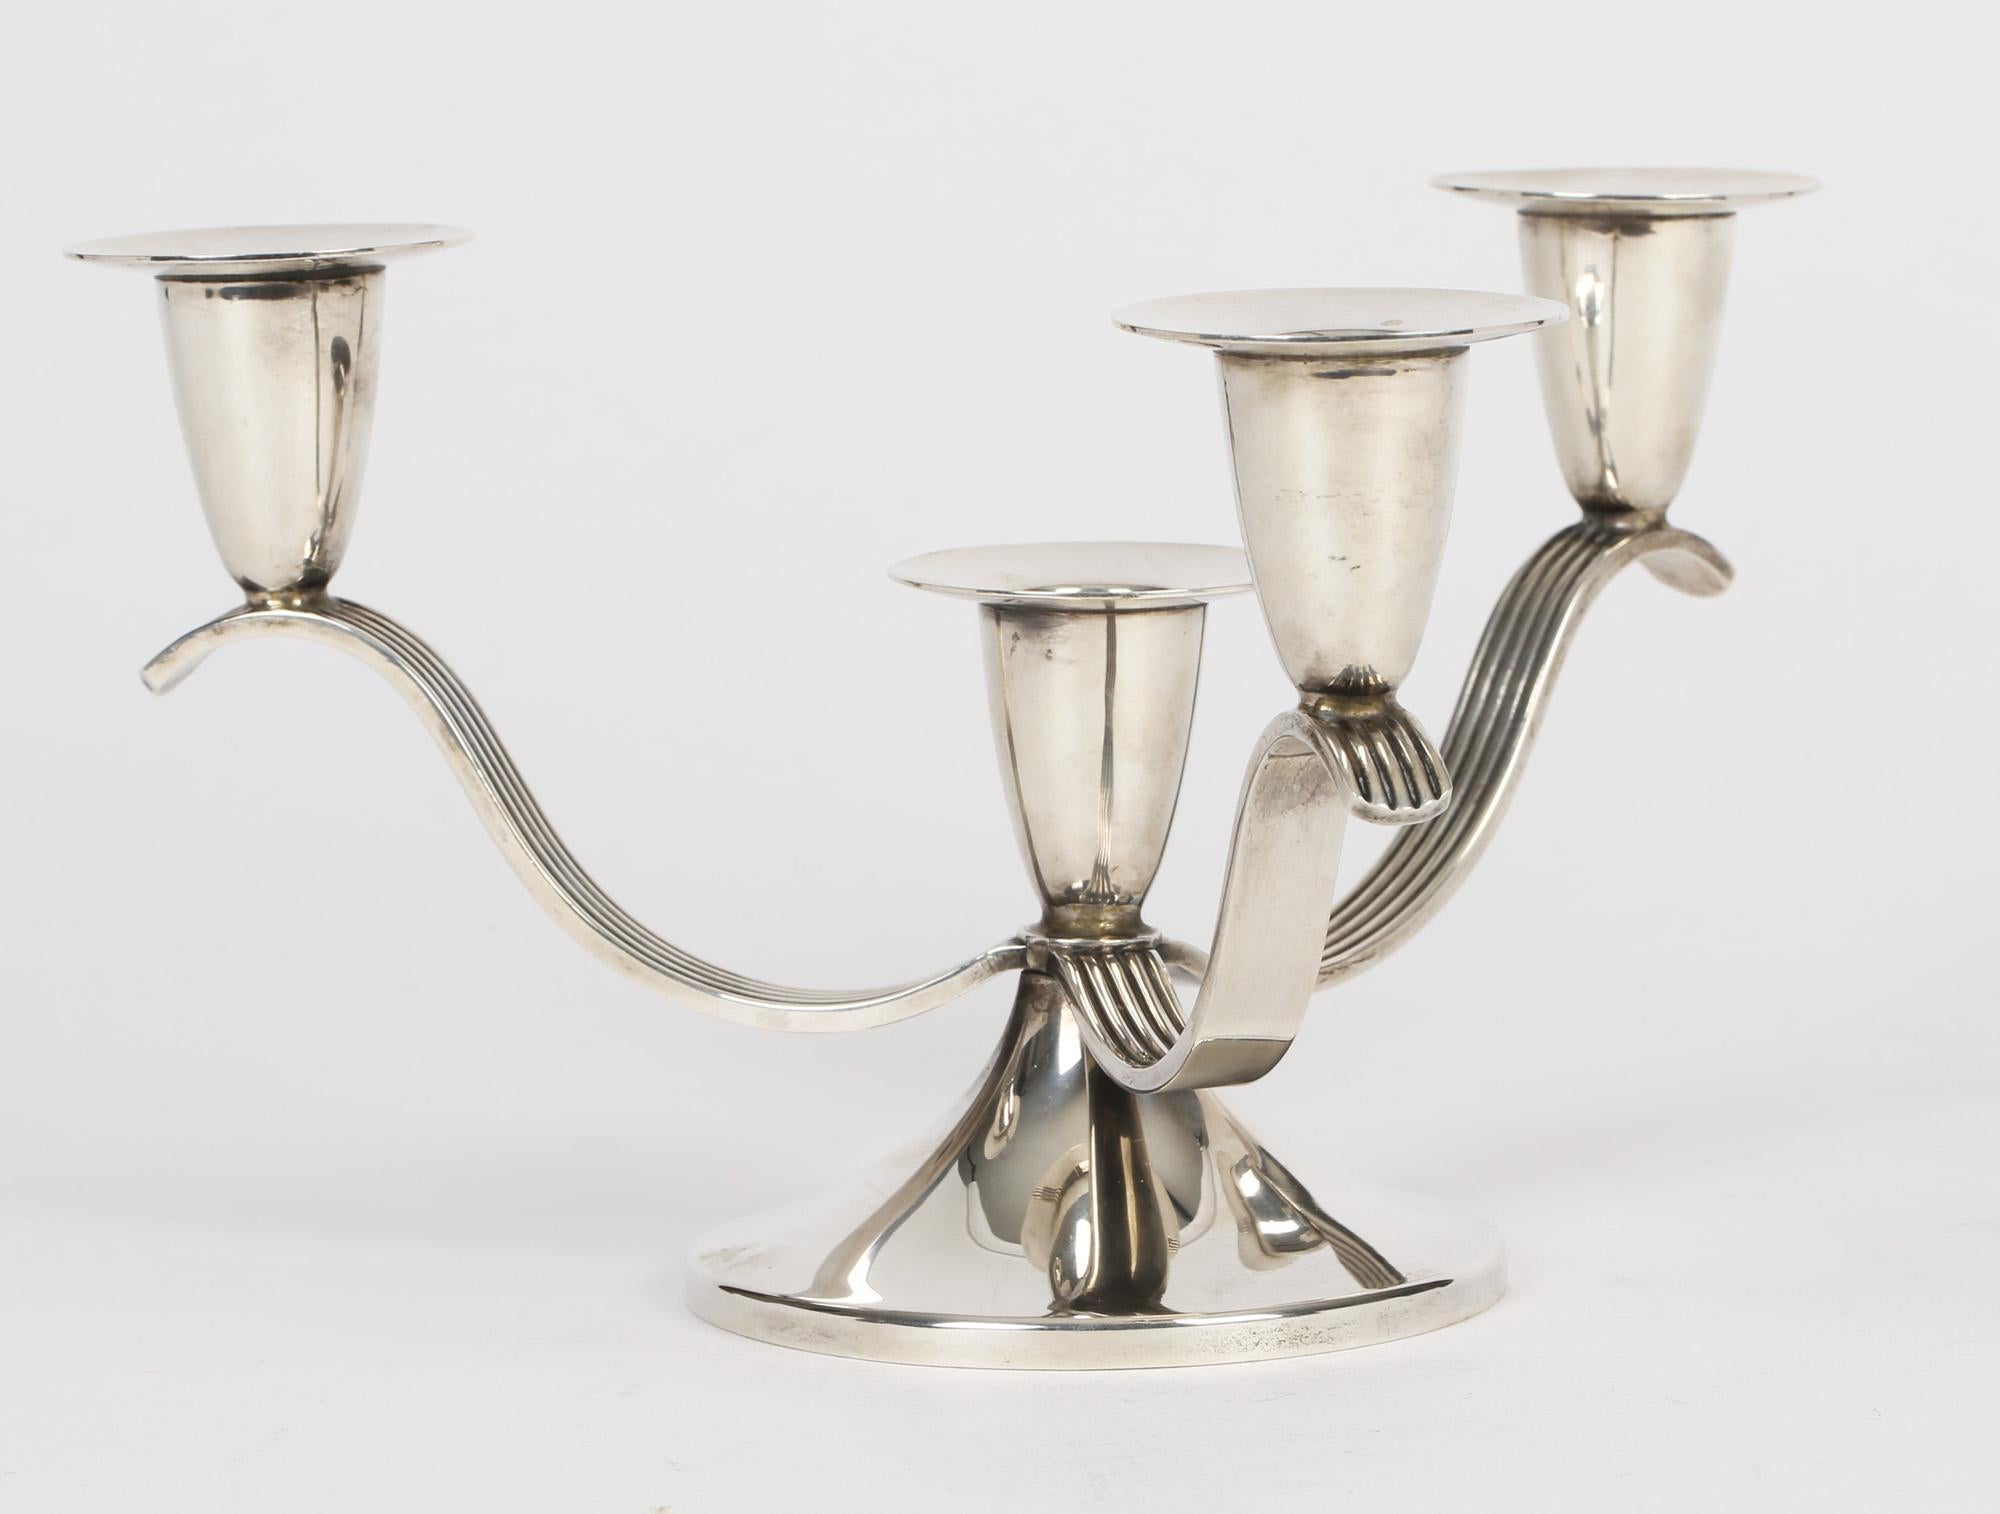 A very fine quality silver three branch candelabra with four candle sconces by Garrard & Co of Regent Street, London and dated 1978. Often referred to as the 'Crown Jewellers' Garrard are renowned for the quality of their craftsmanship. This well